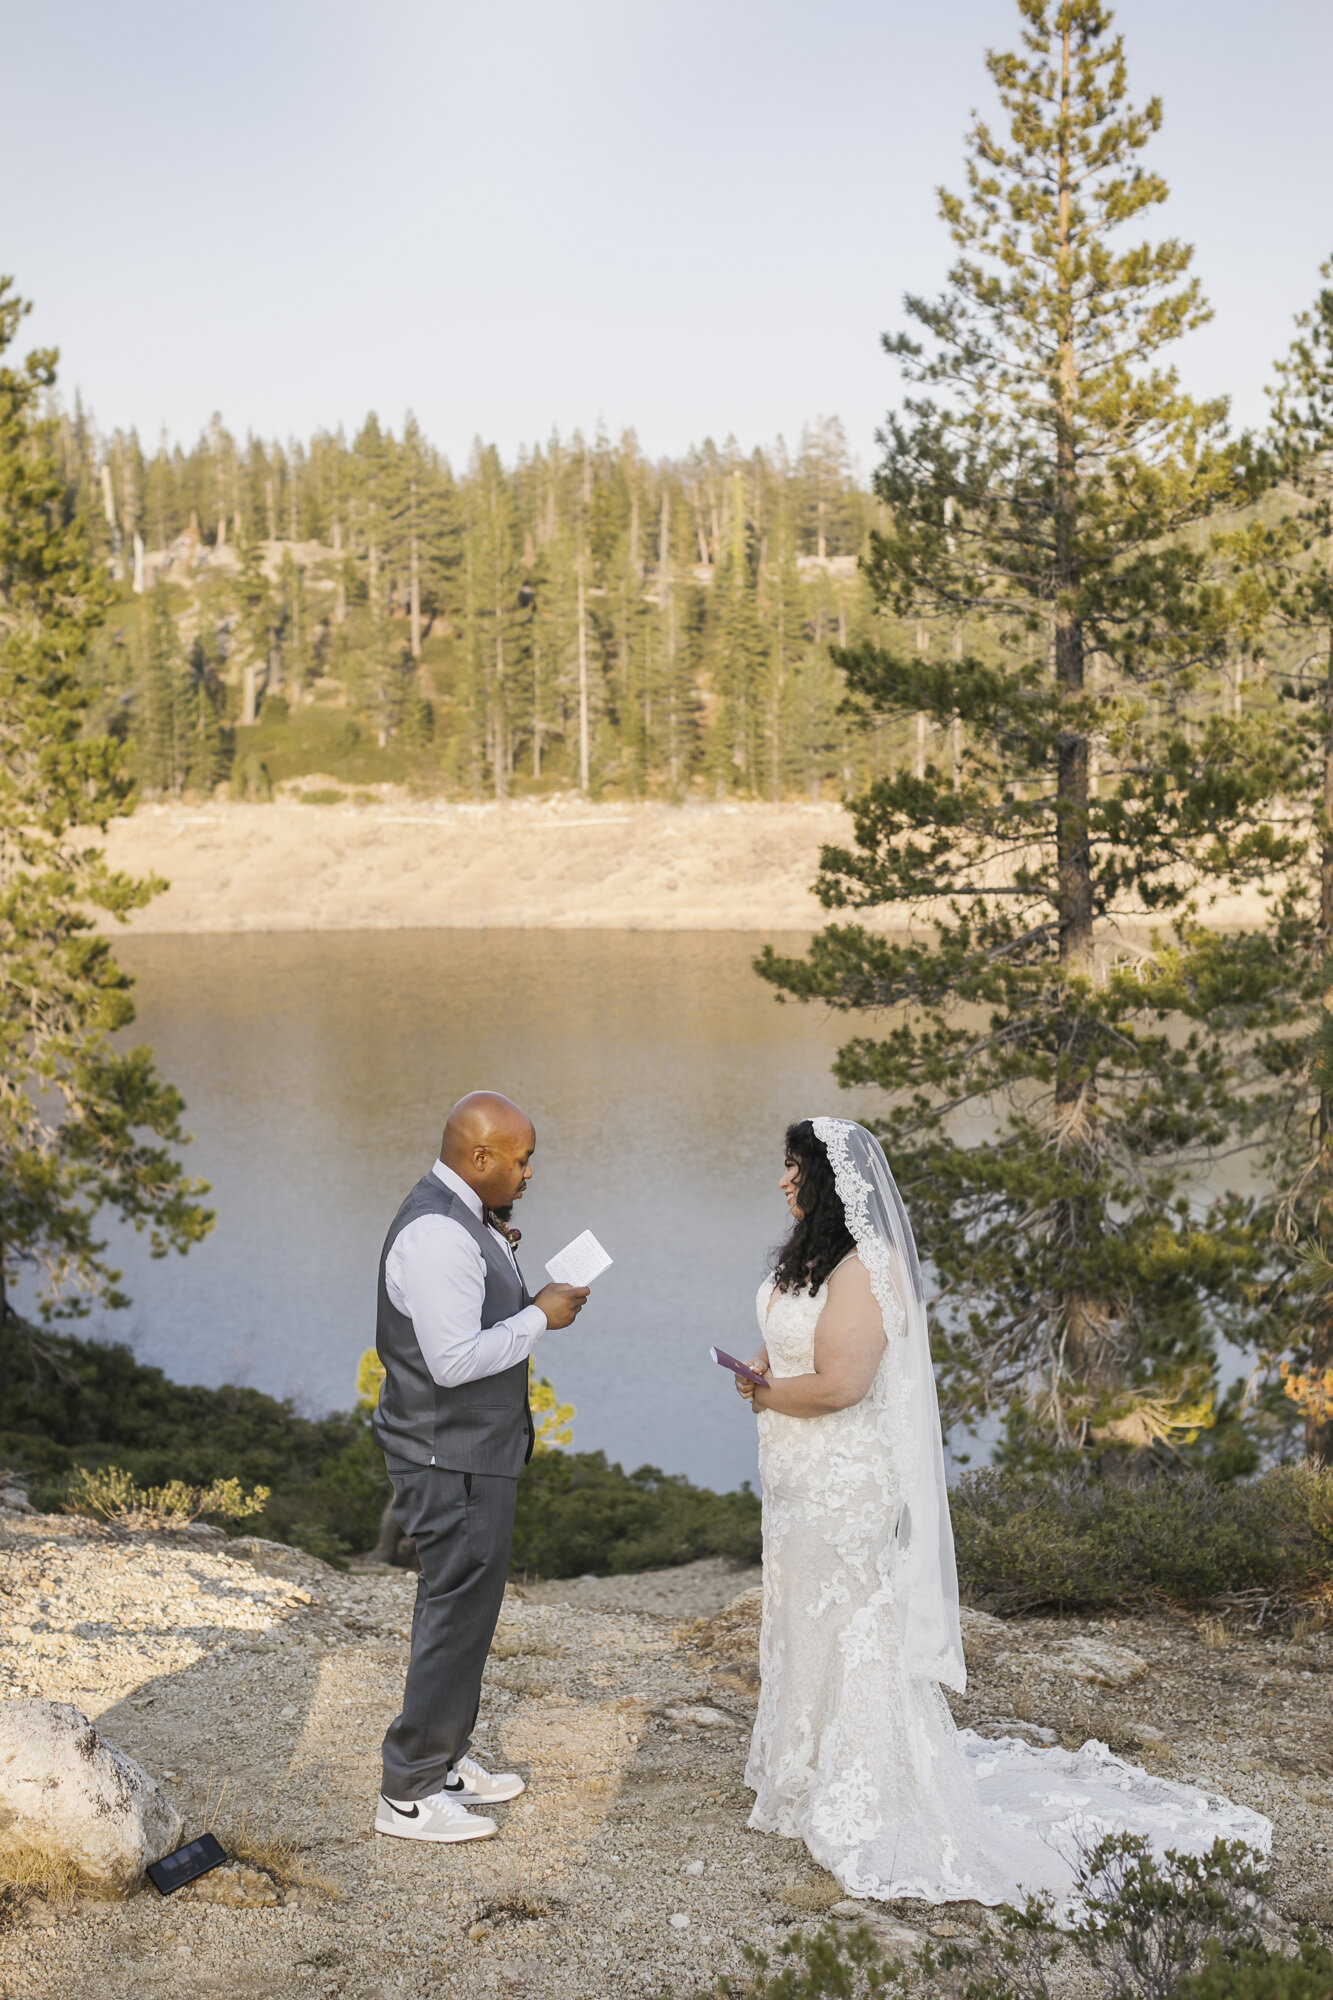 Wedding couple exchange vows in front of a lake in the Tahoe forest